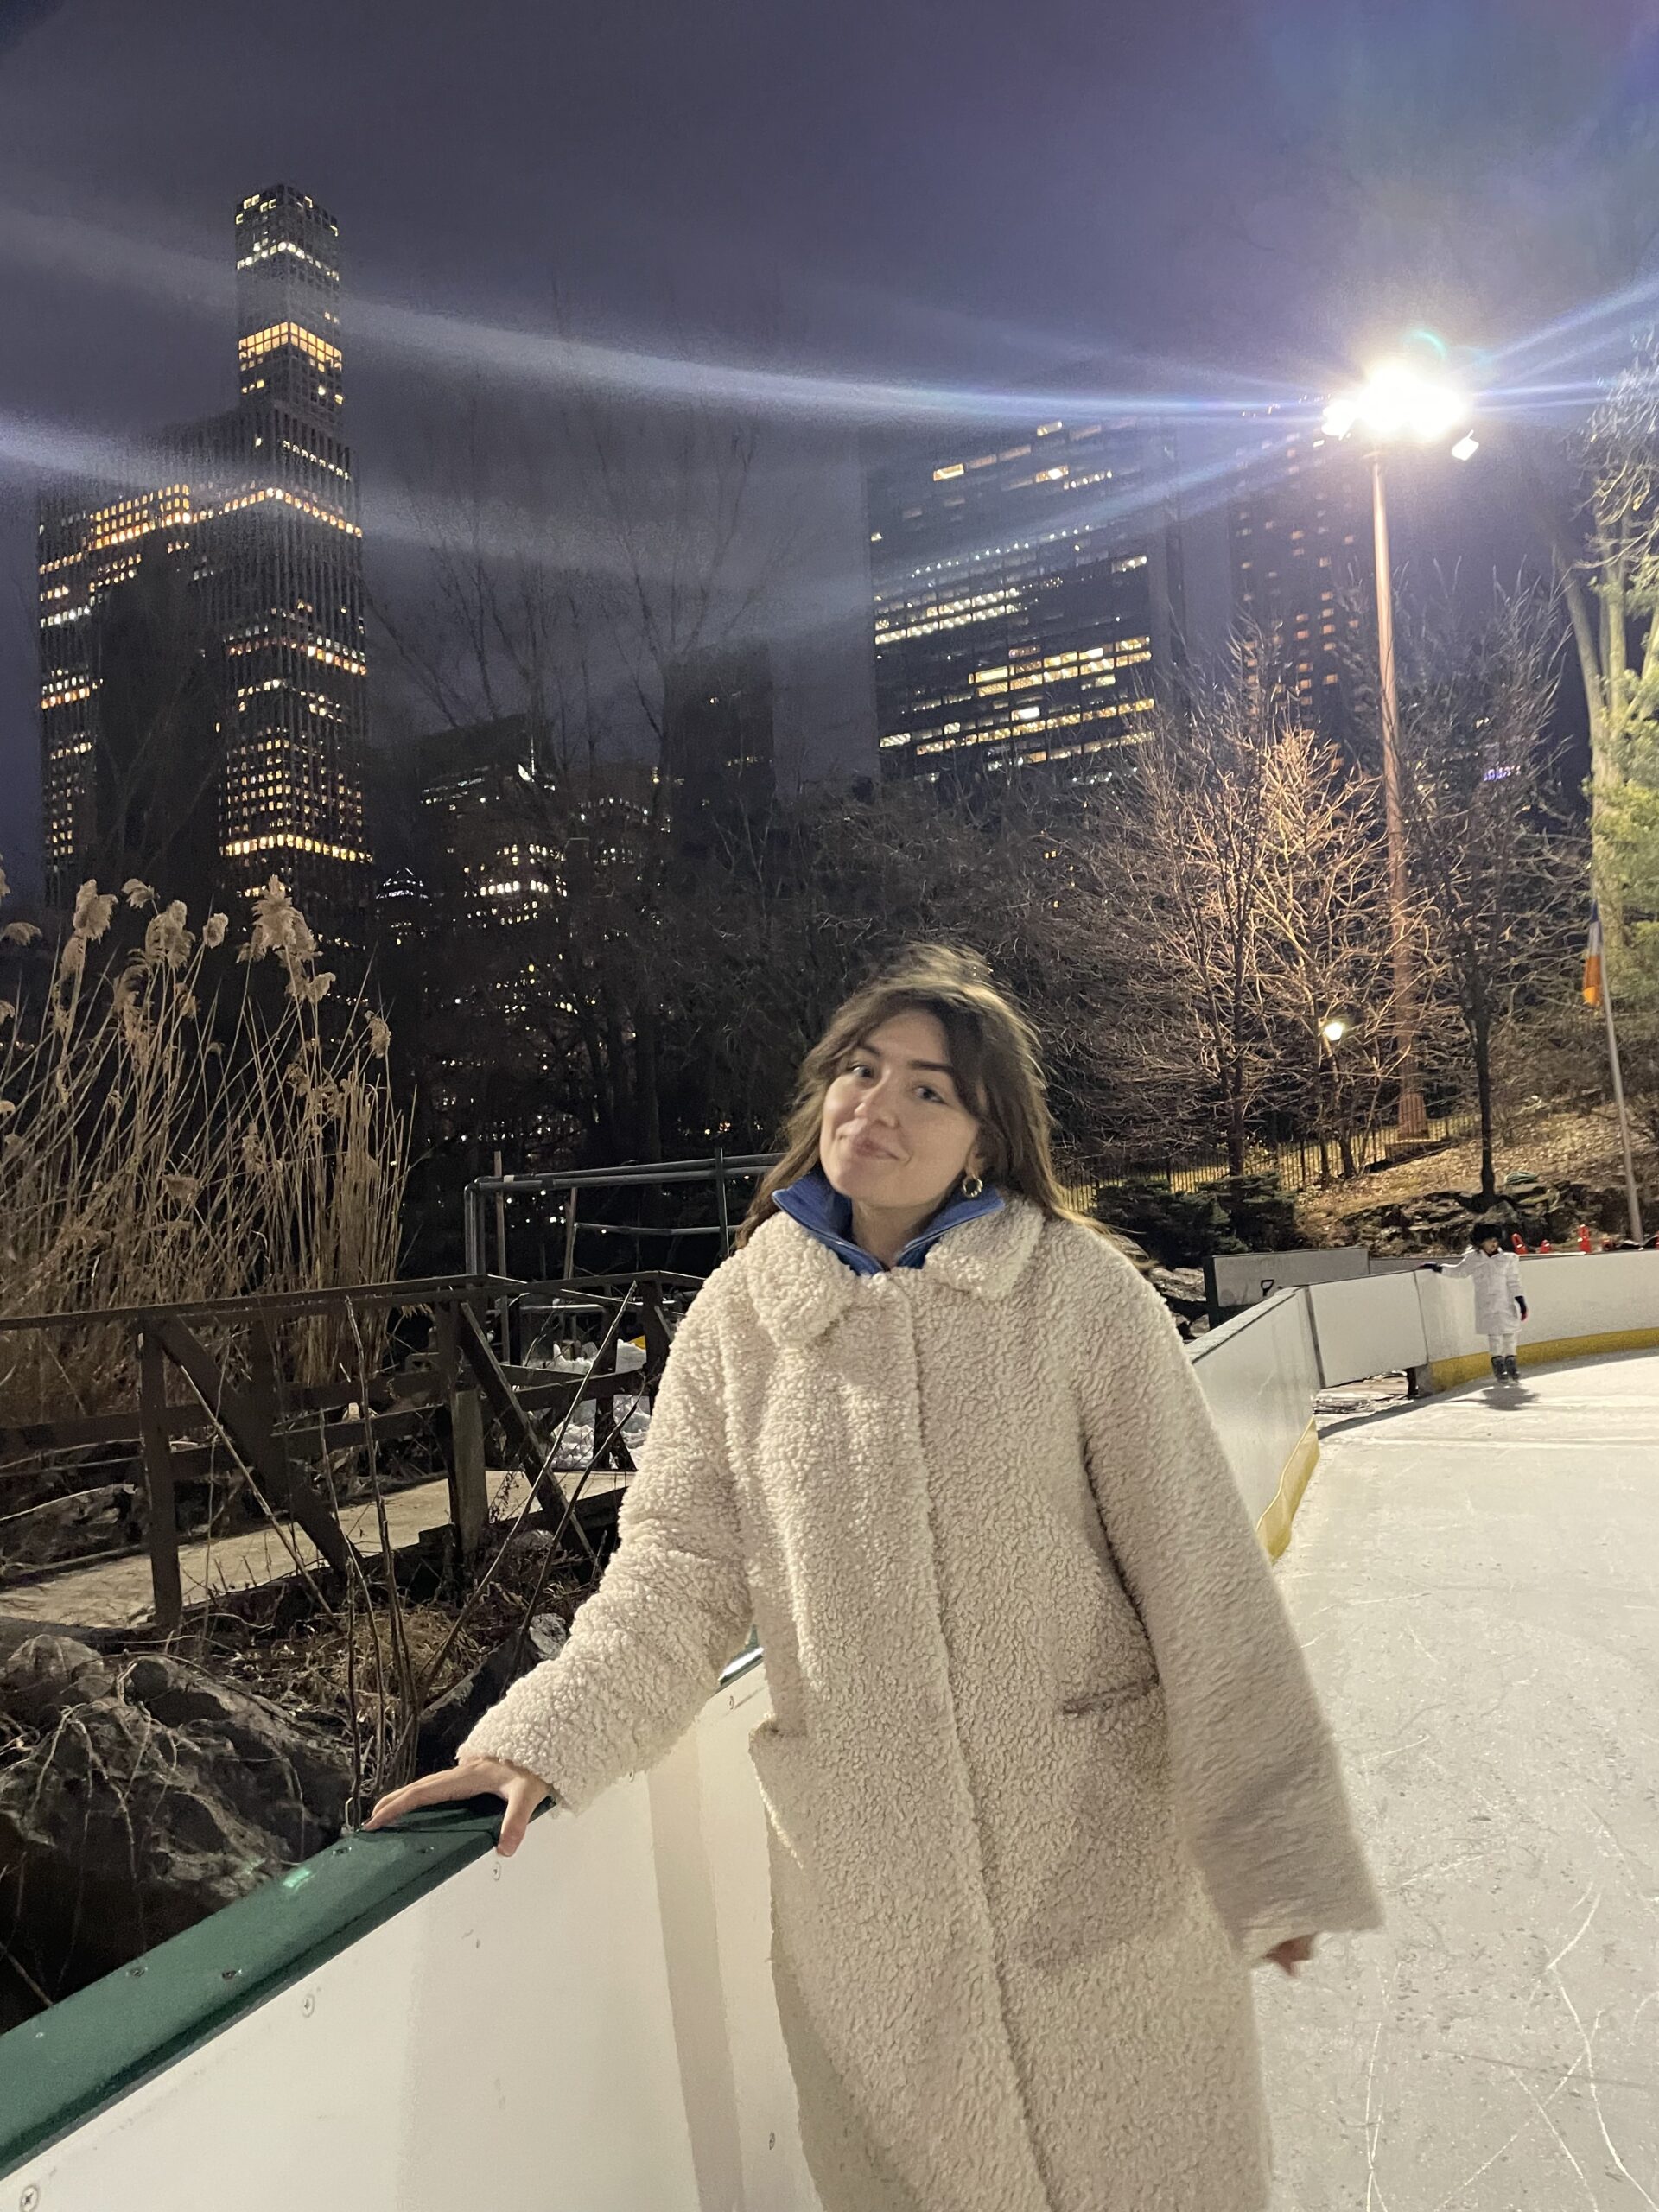 Amina smiles in front of a NYC skyline at Wollman rink